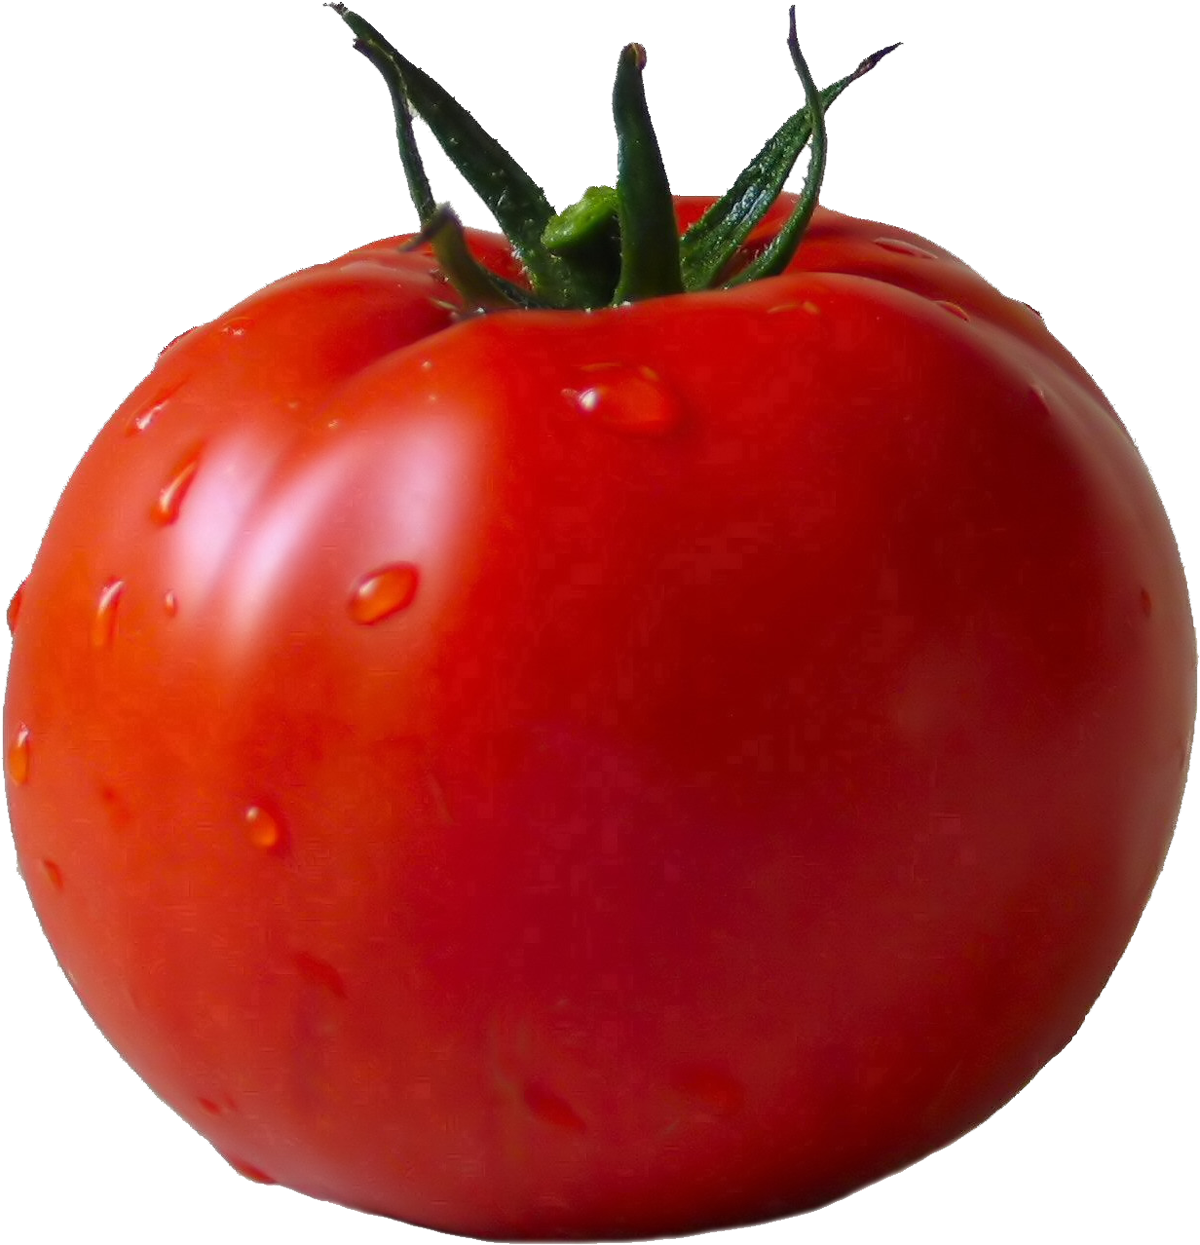 Tomato Png Image - Tomato, Transparent background PNG HD thumbnail